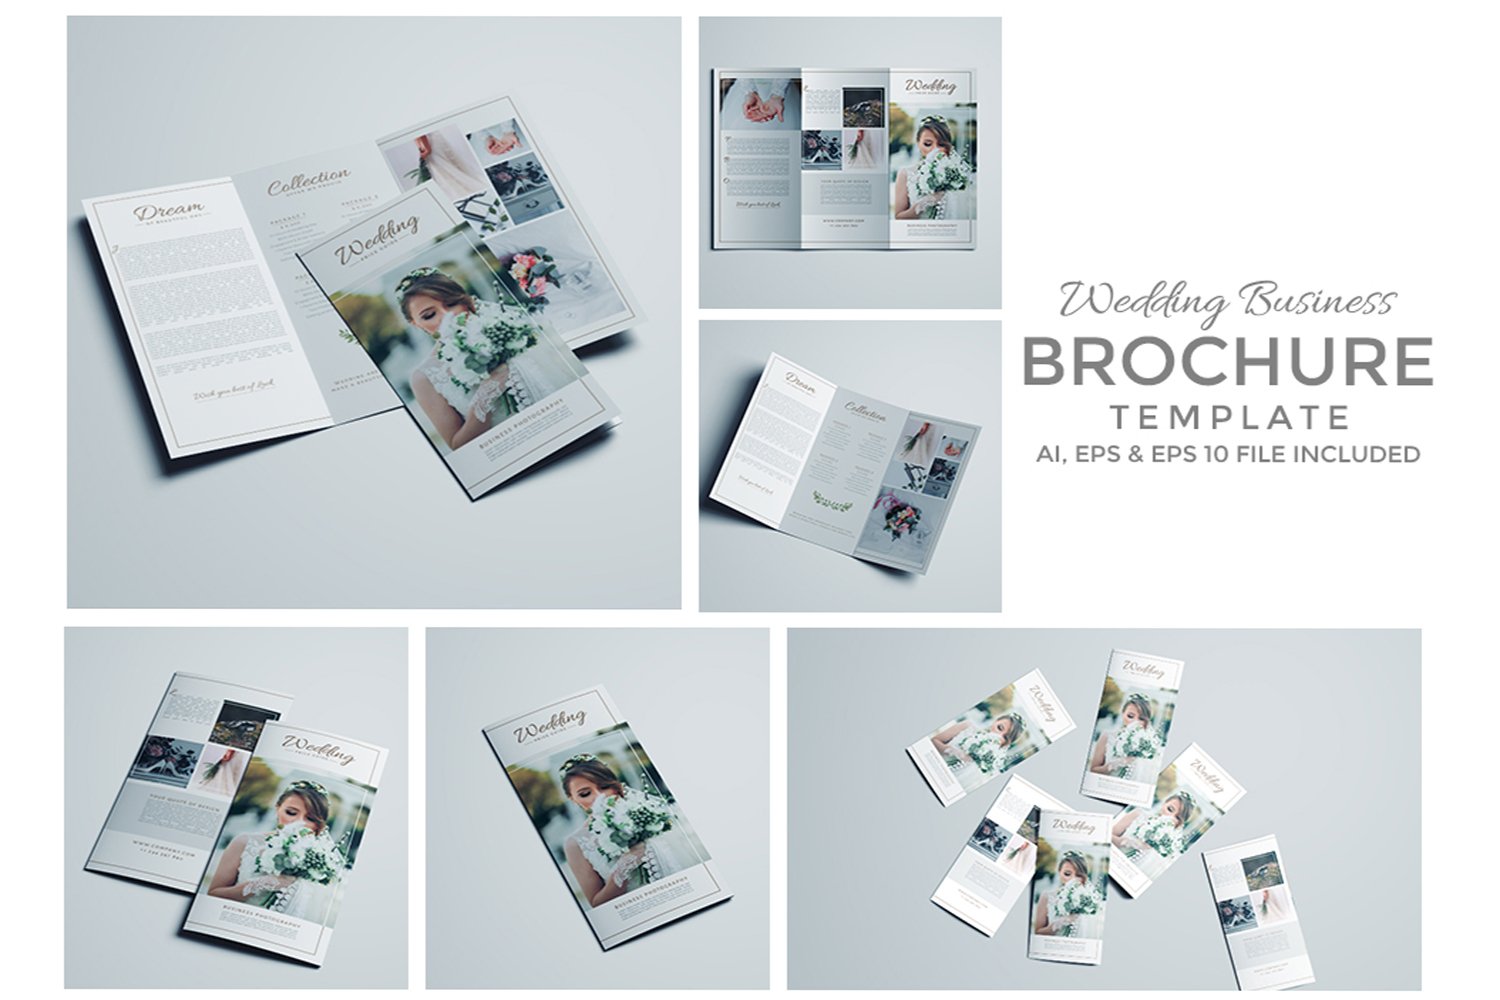 Wedding Business Trifold Brochure cover image.